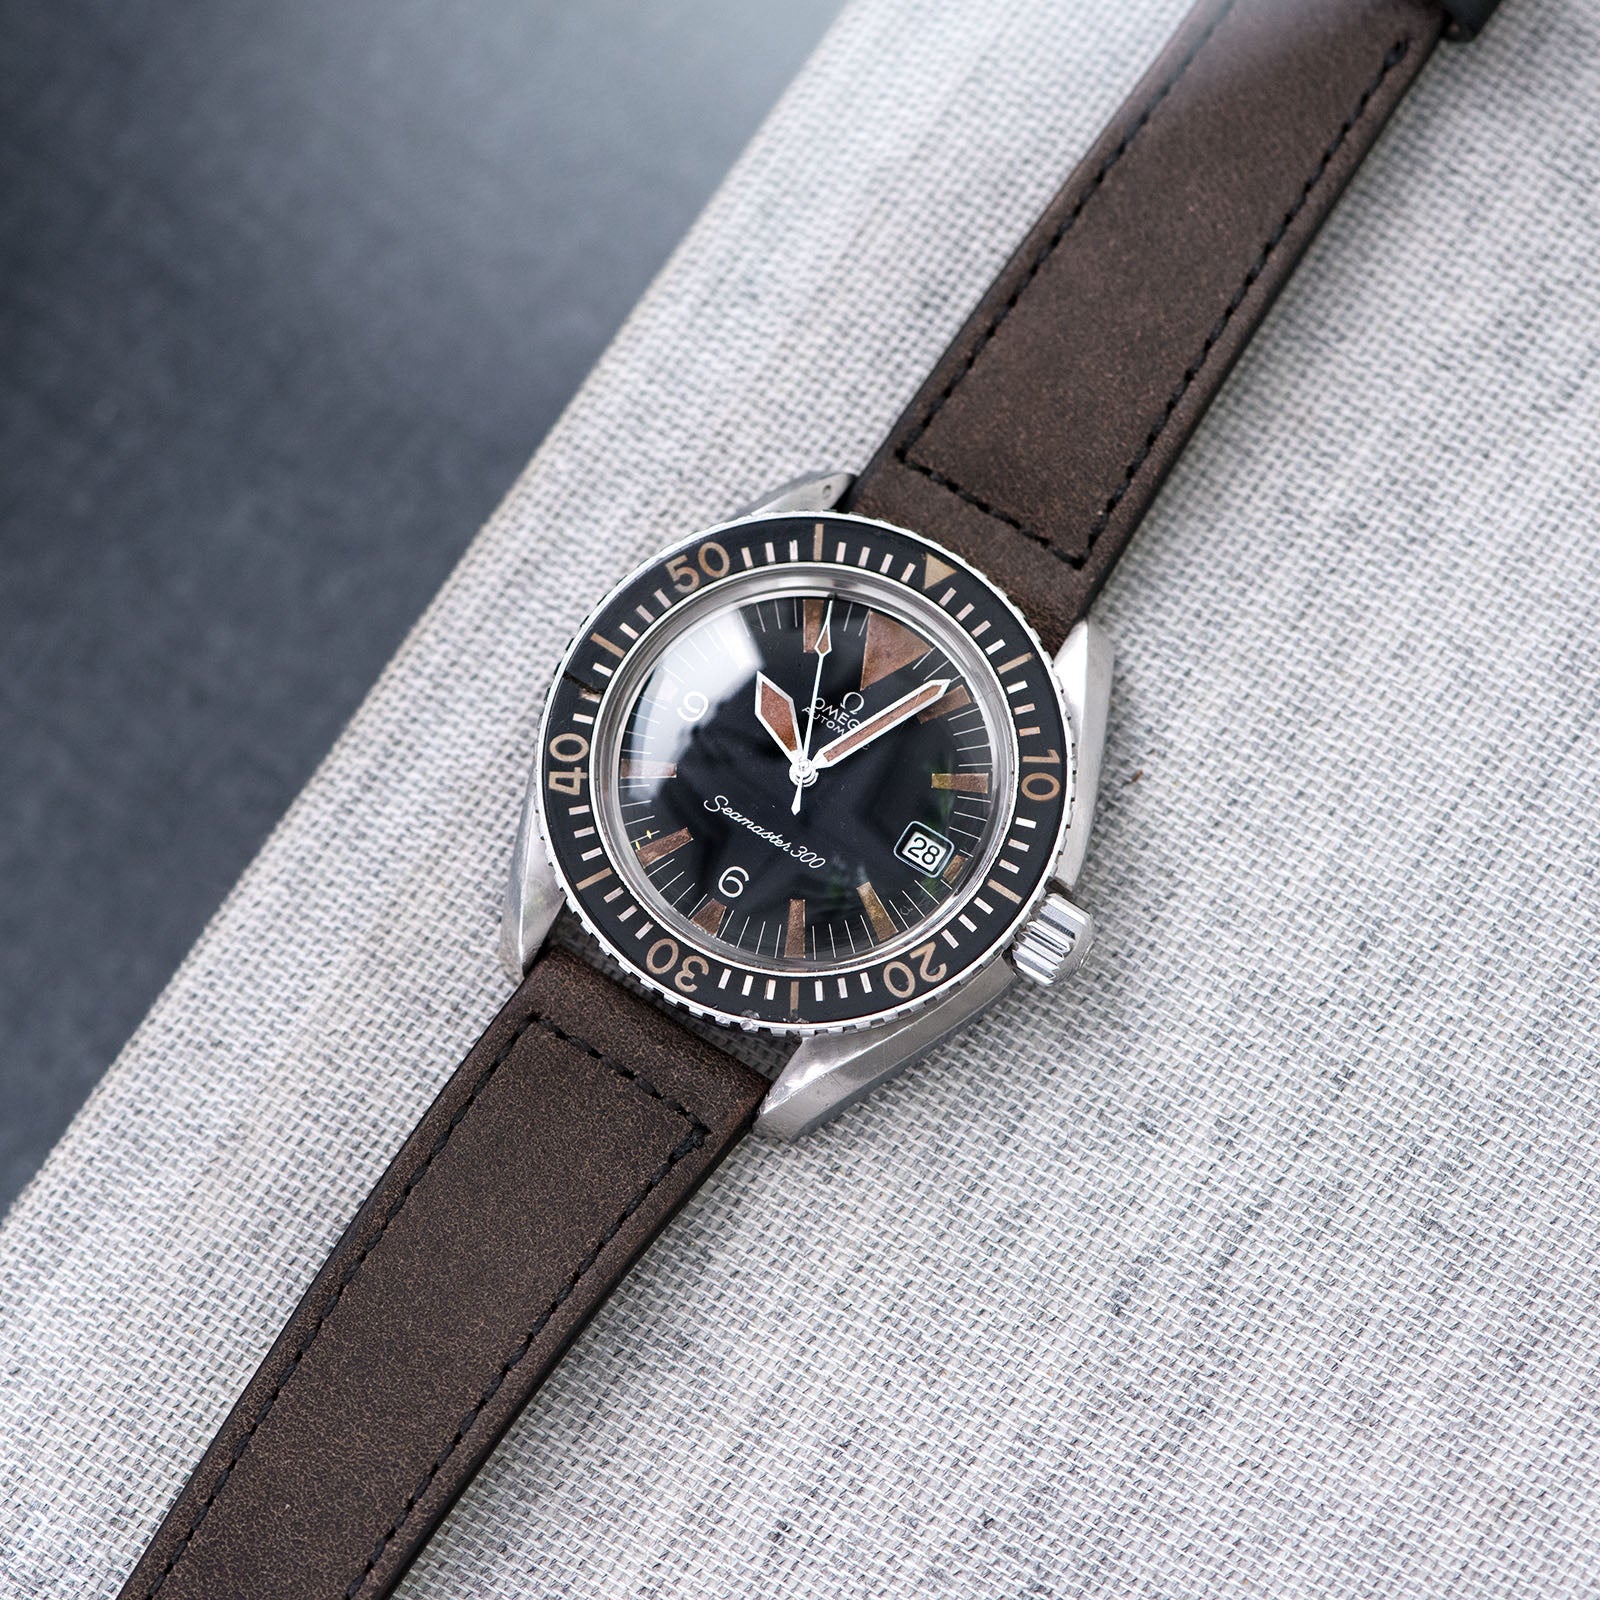 Bulang and Sons_Strap Guide_The omega SM 300 Seamaster_Ravello Brown Leather Watch Strap